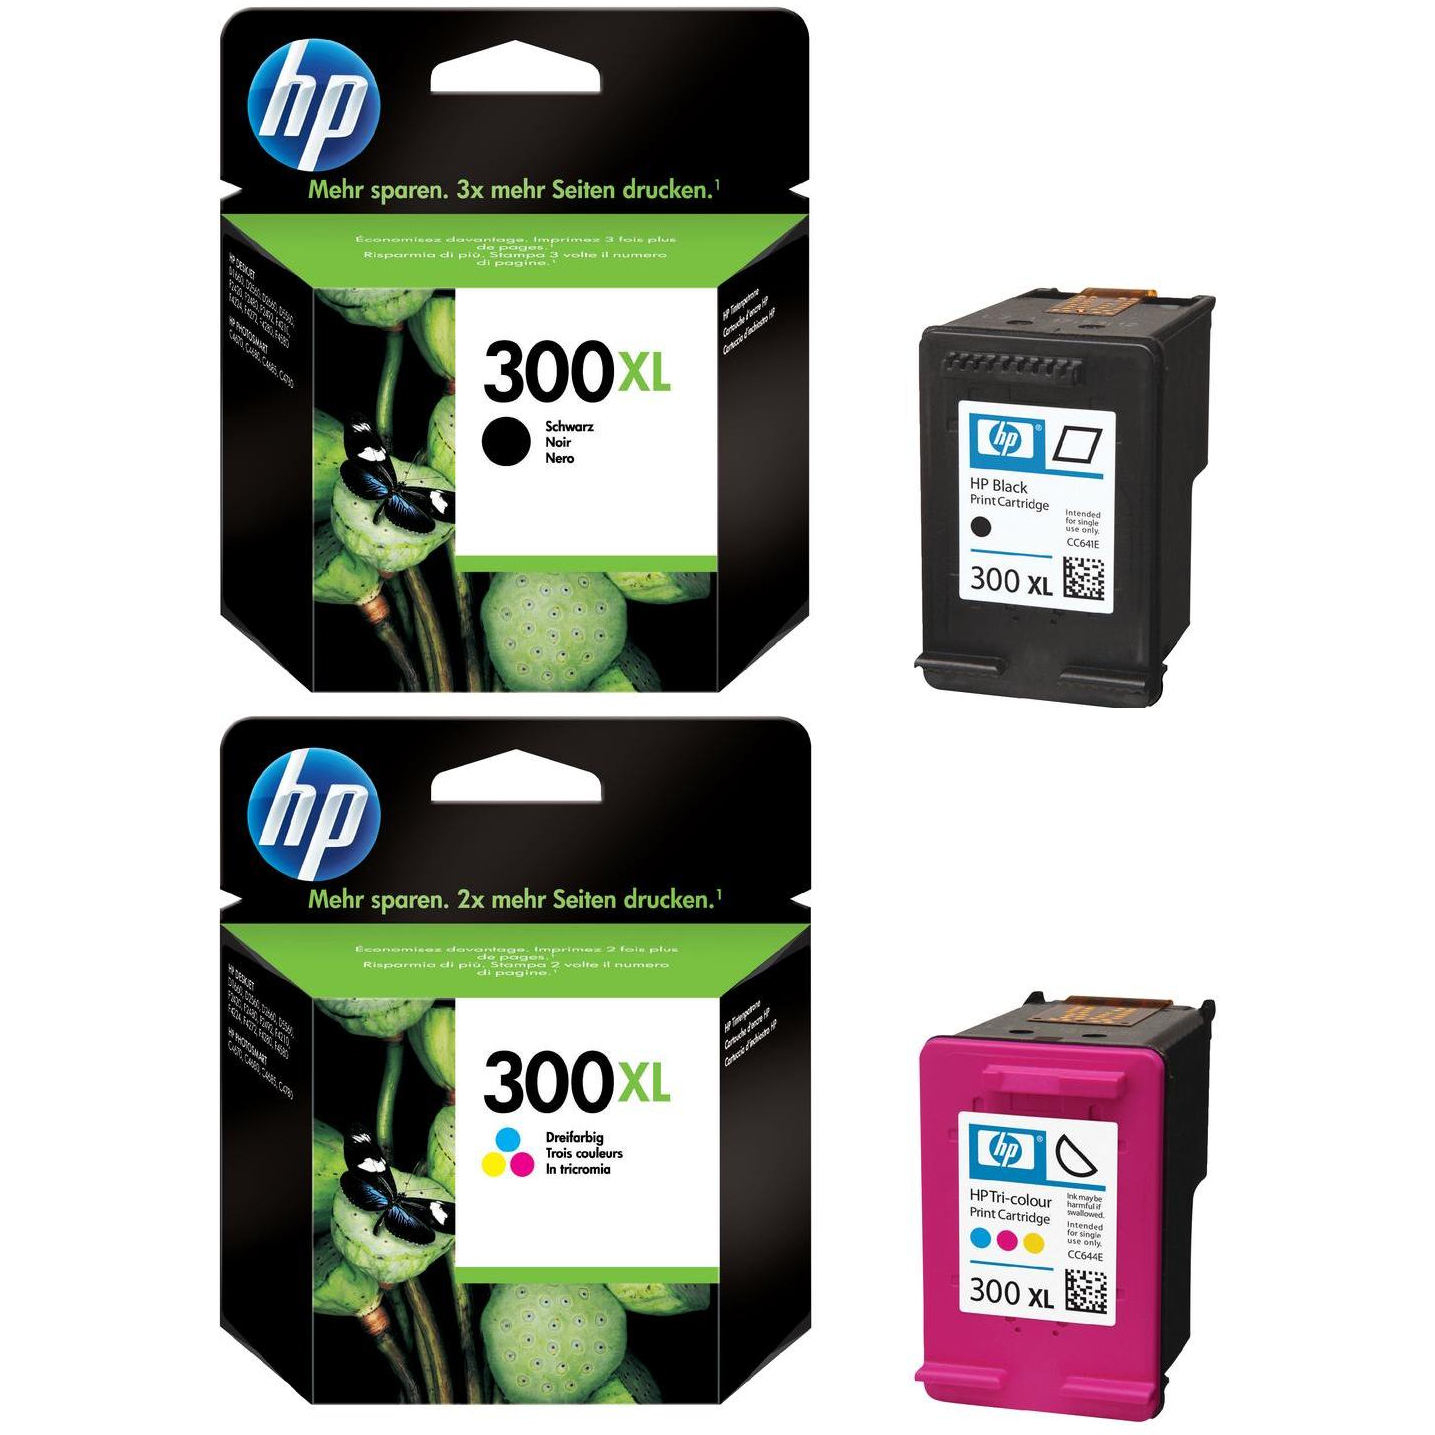 Related to HP OFFICEJET 500: HP-300XL-Pack